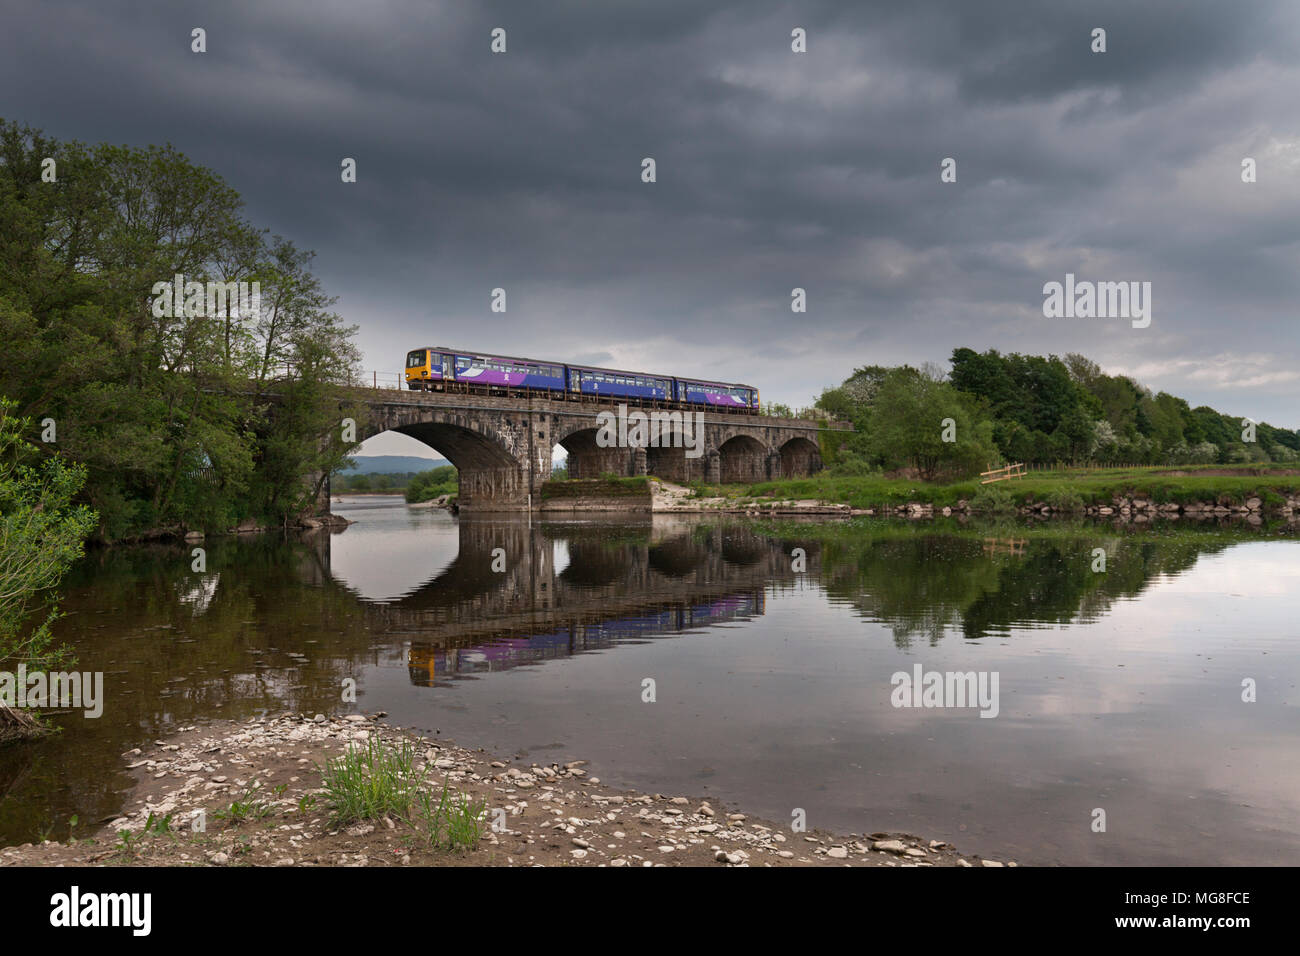 An Arriva Northern rail class 144 pacer train crosses the river lune at  Arkholme east of Carnforth Stock Photo